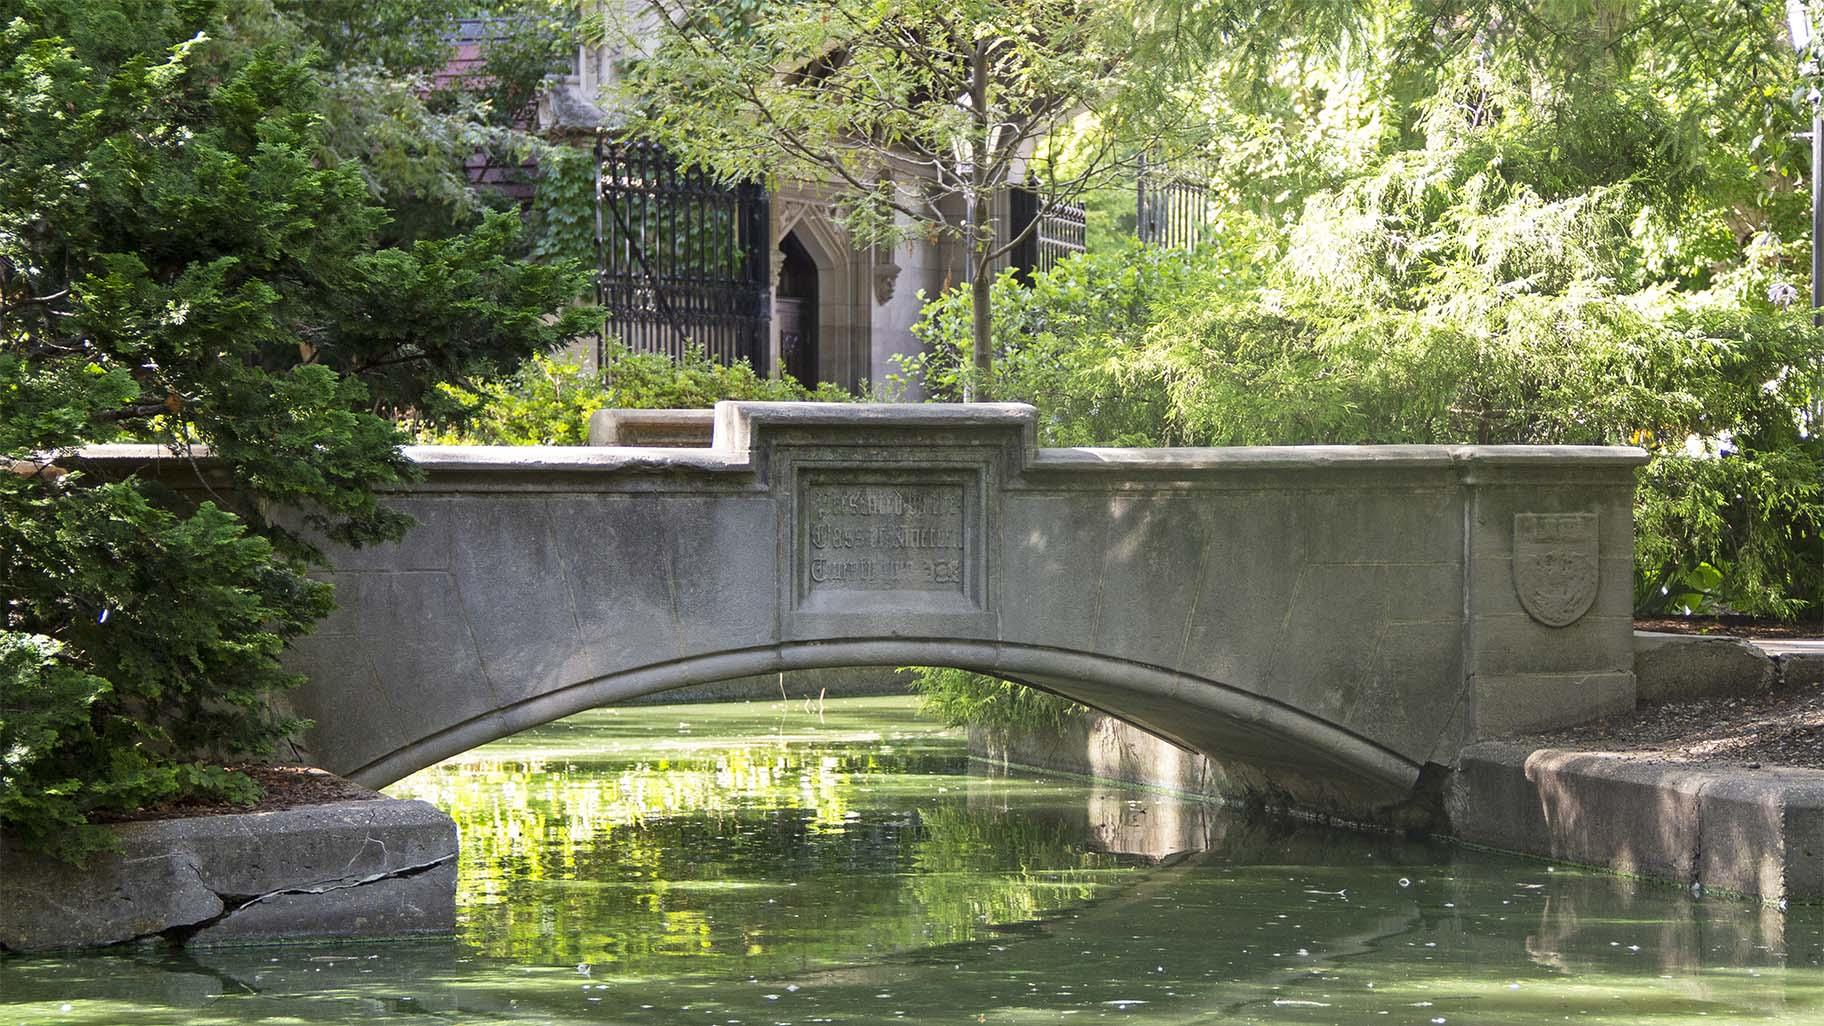 The Botany Pond is part of the botanical gardens in the Hull Court biology quadrangle at the University of Chicago. (Credit: Jessica Mlinaric)